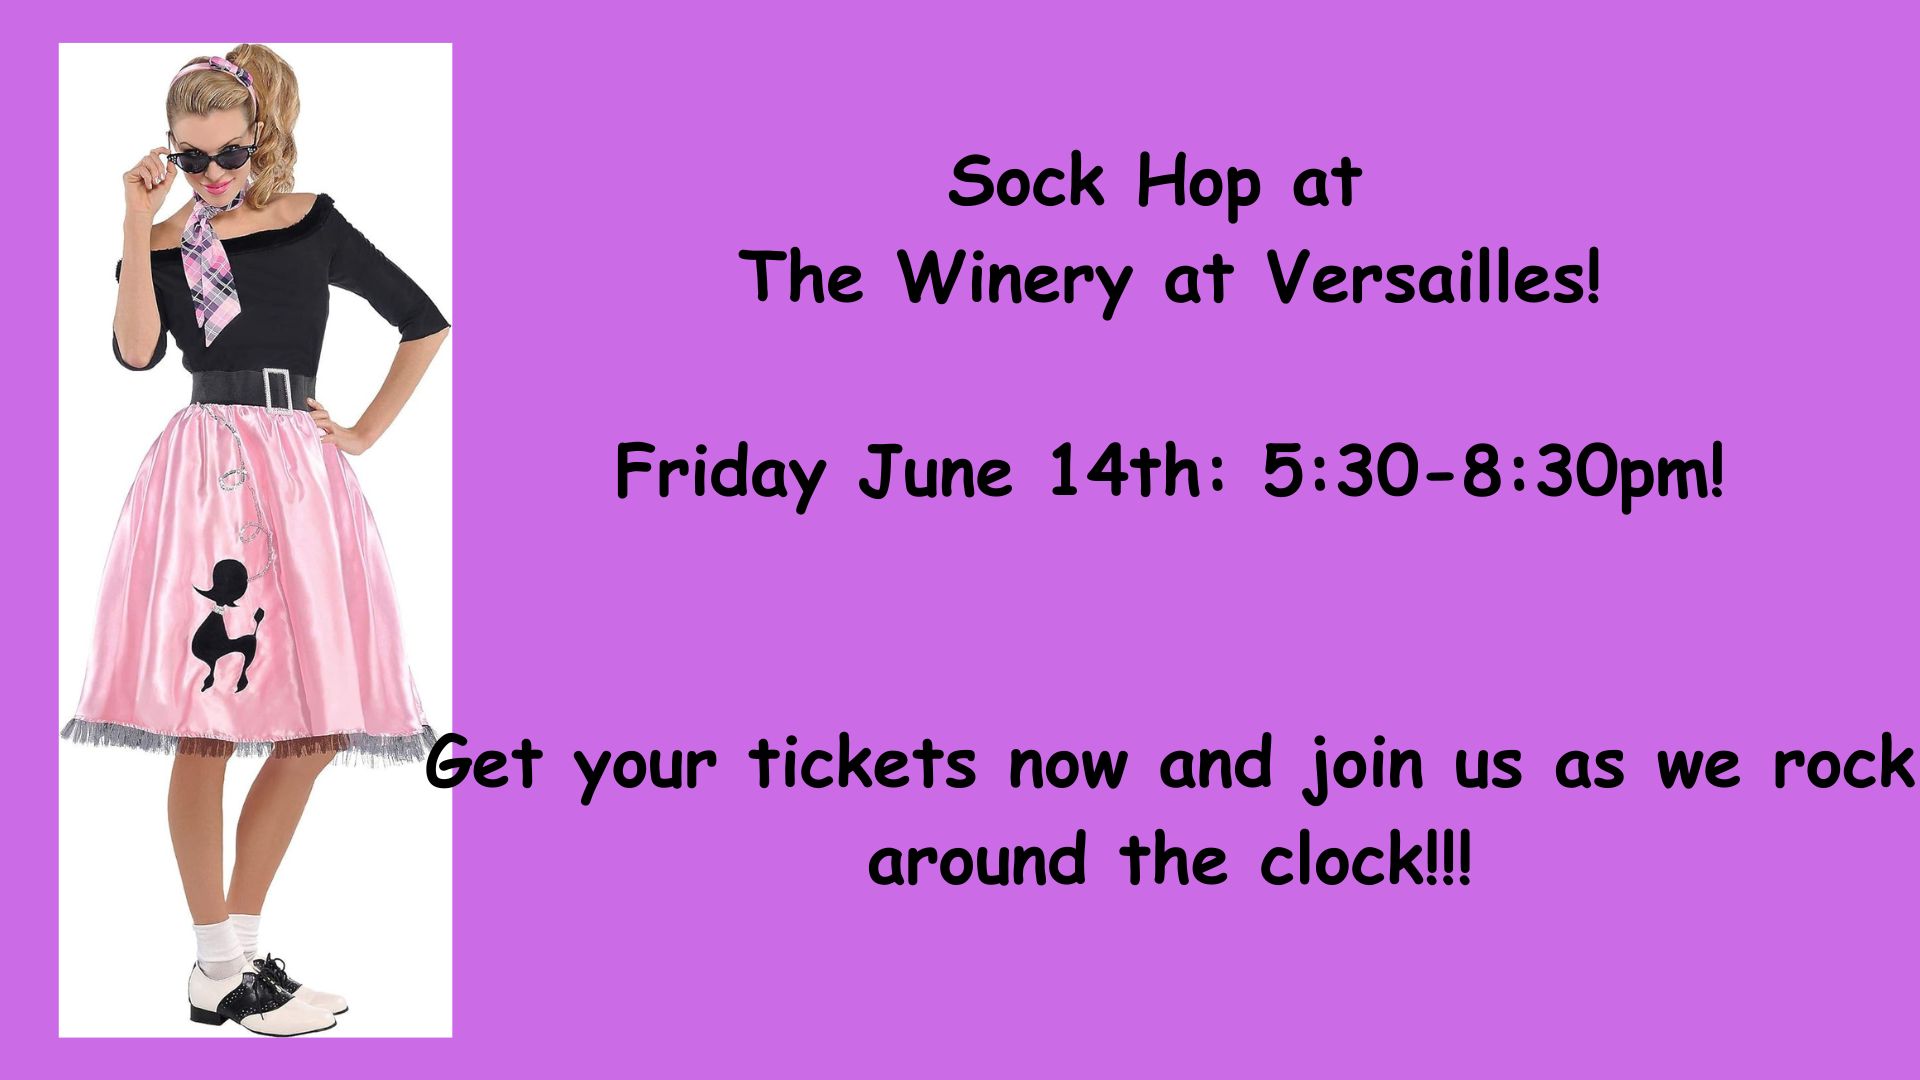 Sock Hop at The Winery with Tony Gretsch!!